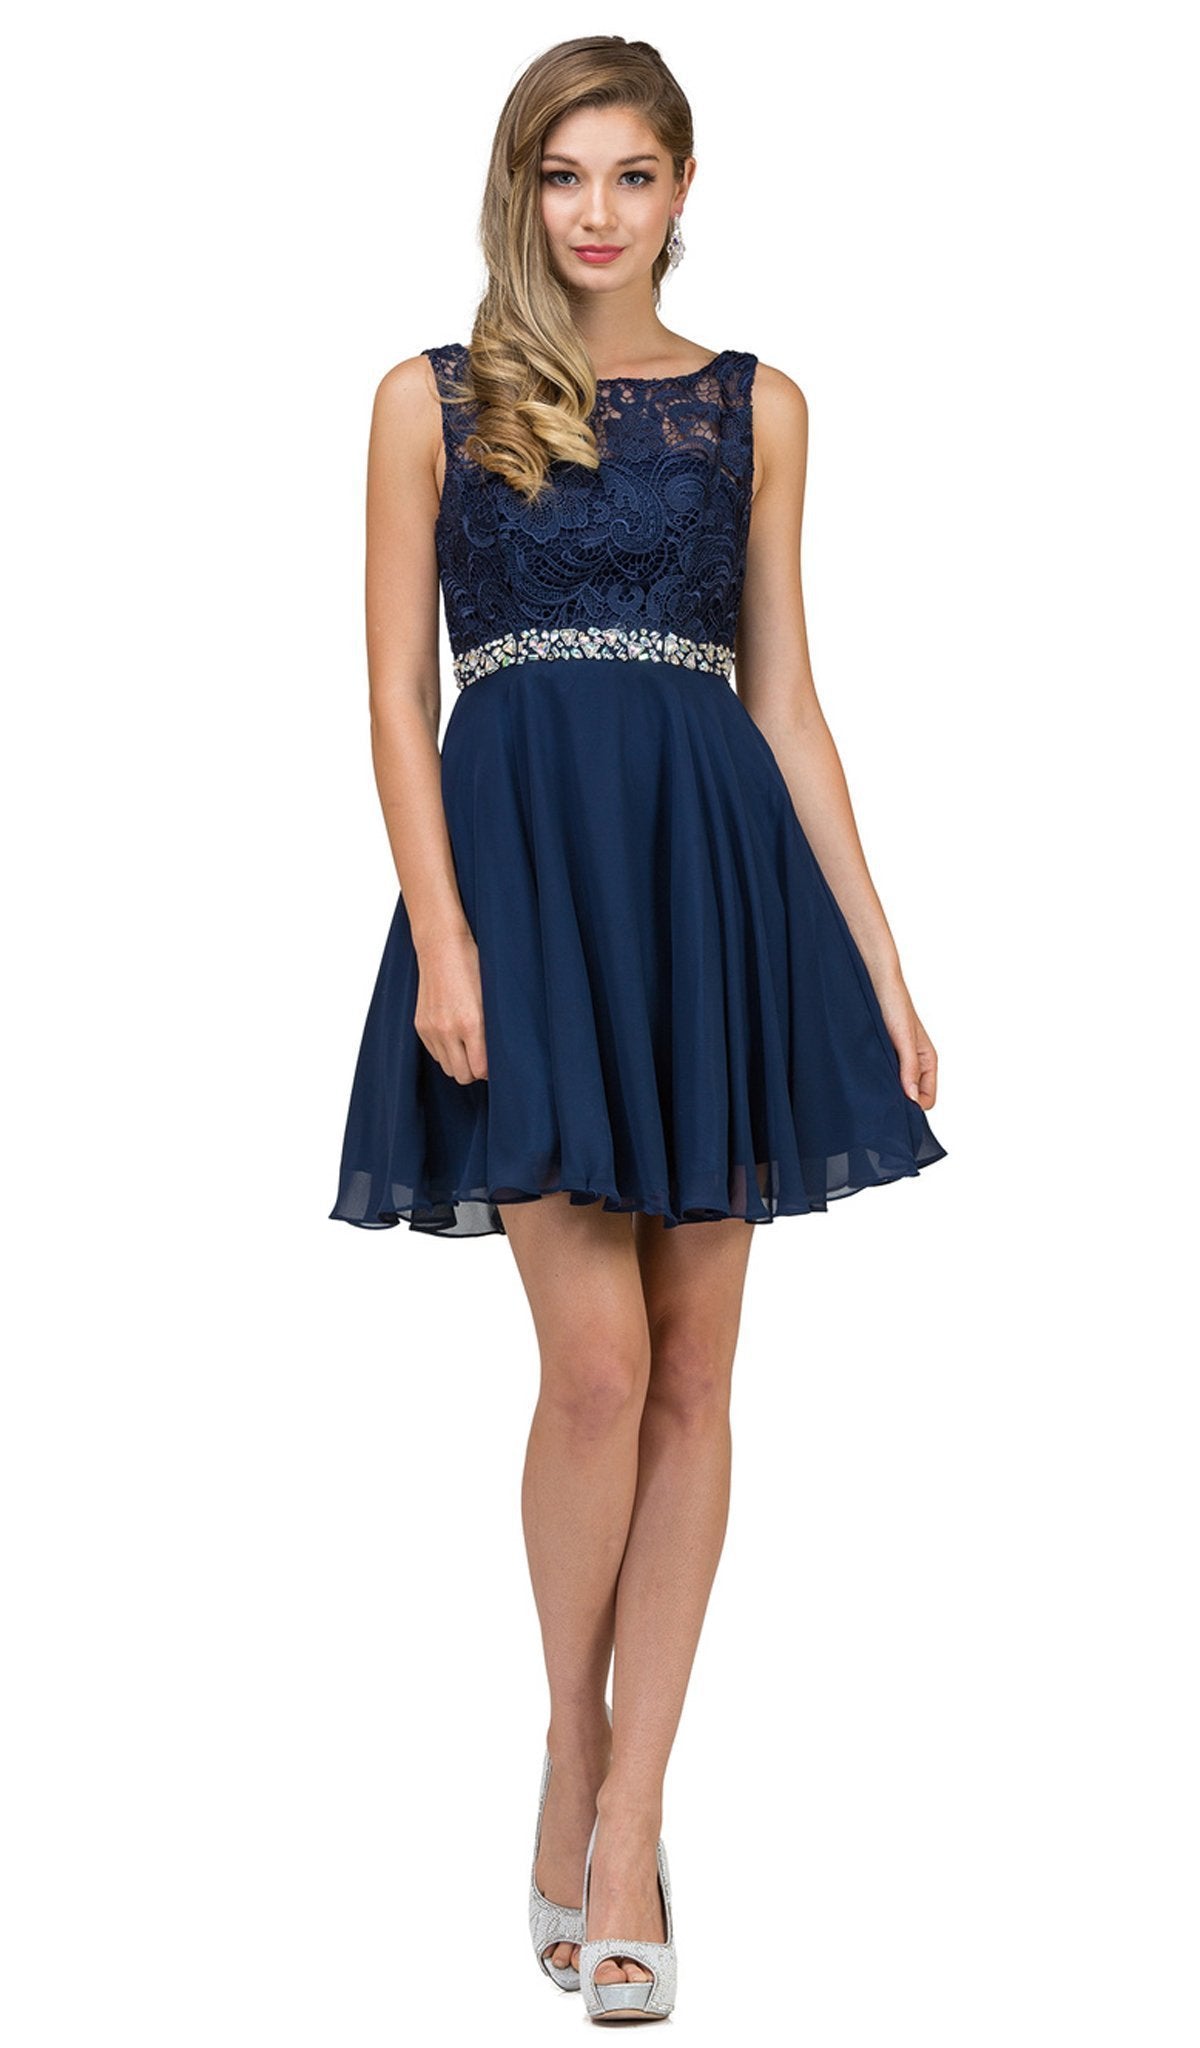 Dancing Queen - 9659 Illusion Lace Bodice Cocktail Dress in Navy Blue